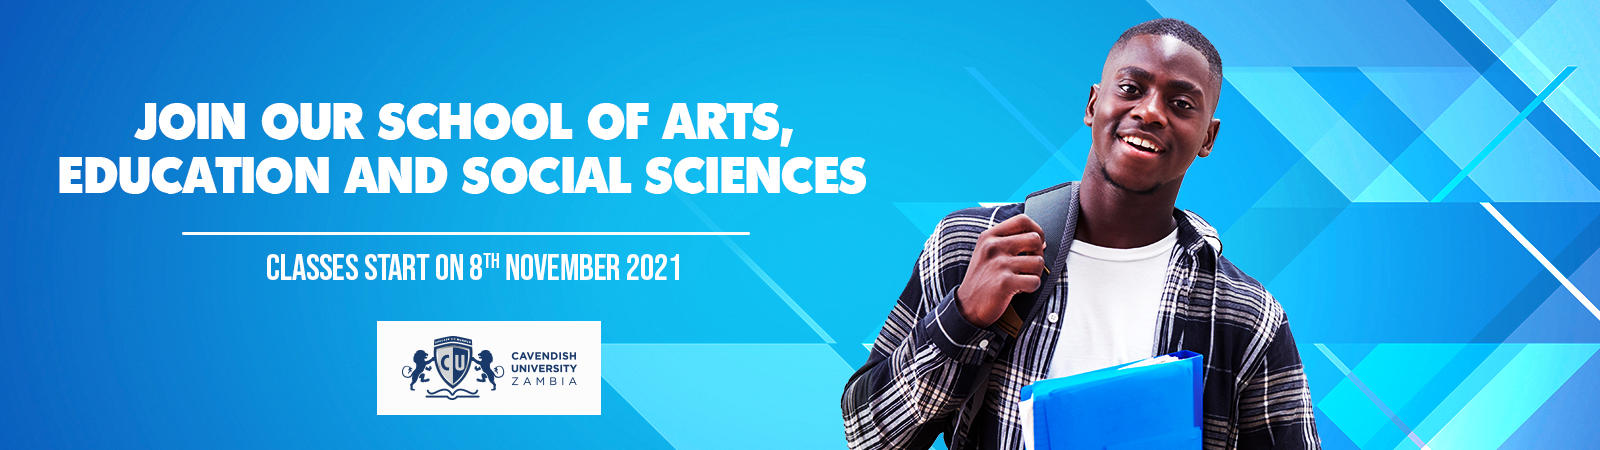 Join our School of Arts, Education and Social Sciences